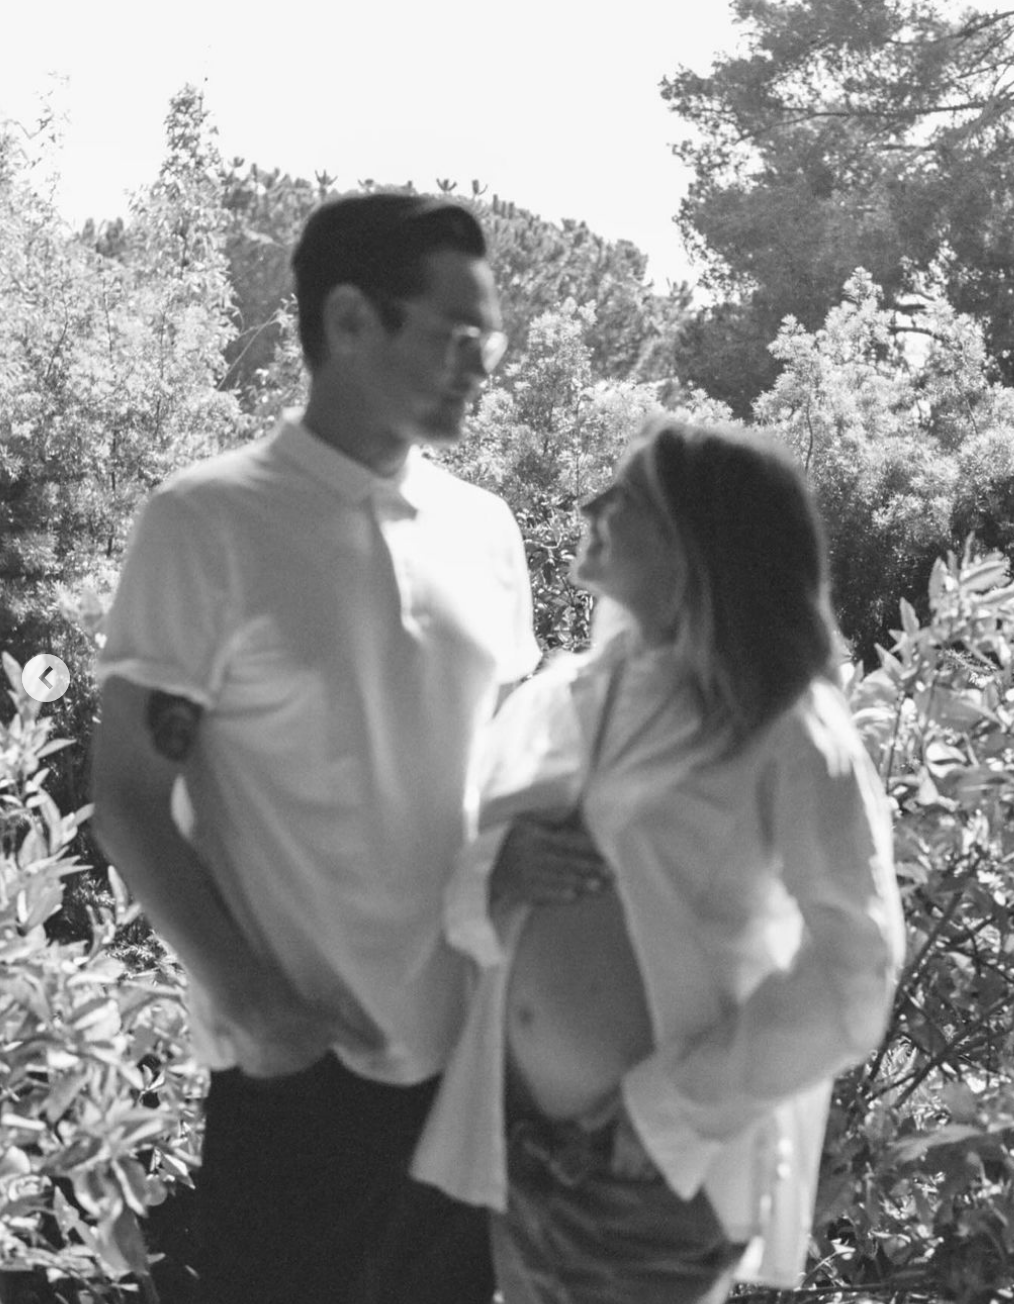 Christopher in a buttoned shirt and Ashley  in an open shirt cradling her visible baby bump, both smiling, with trees in the background